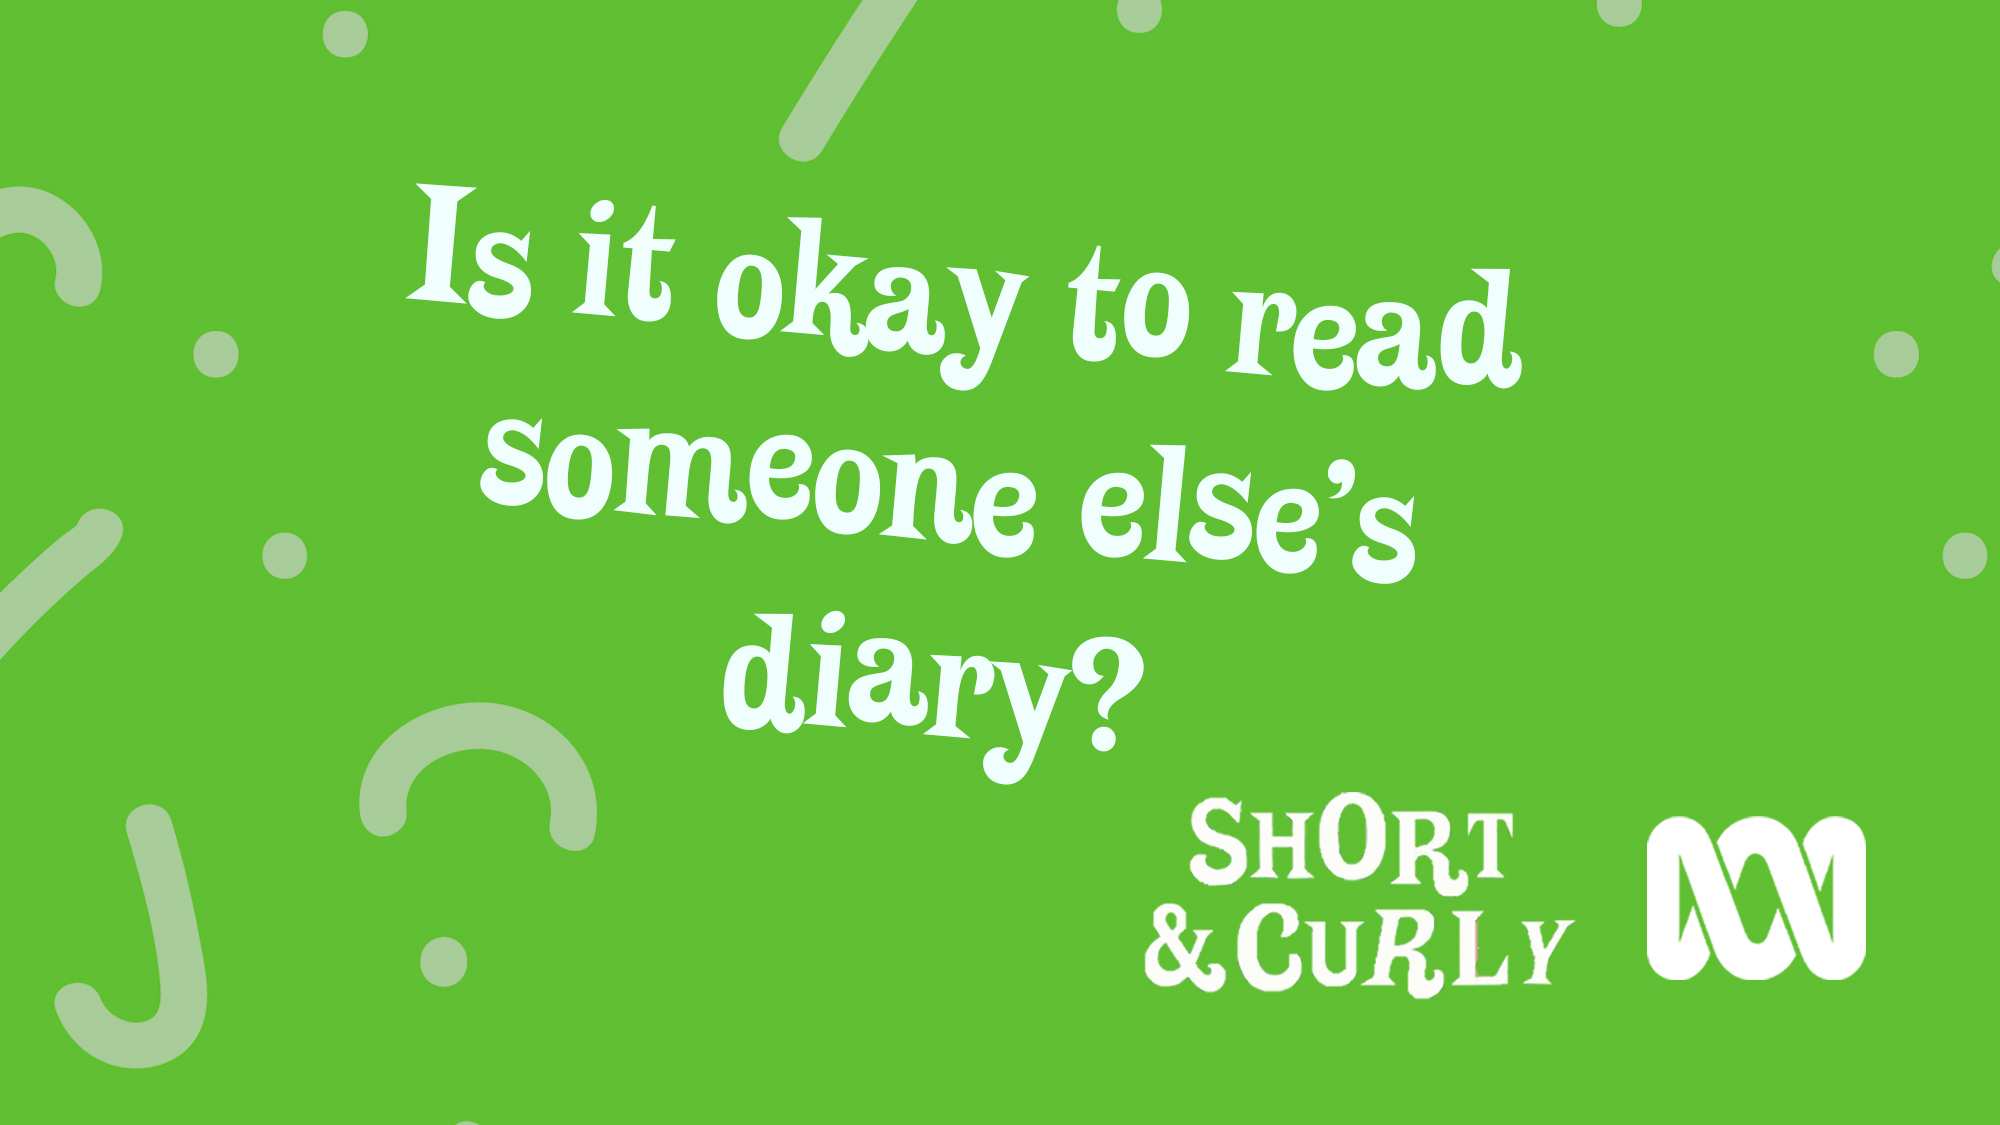 Is it okay to read someone else's diary?